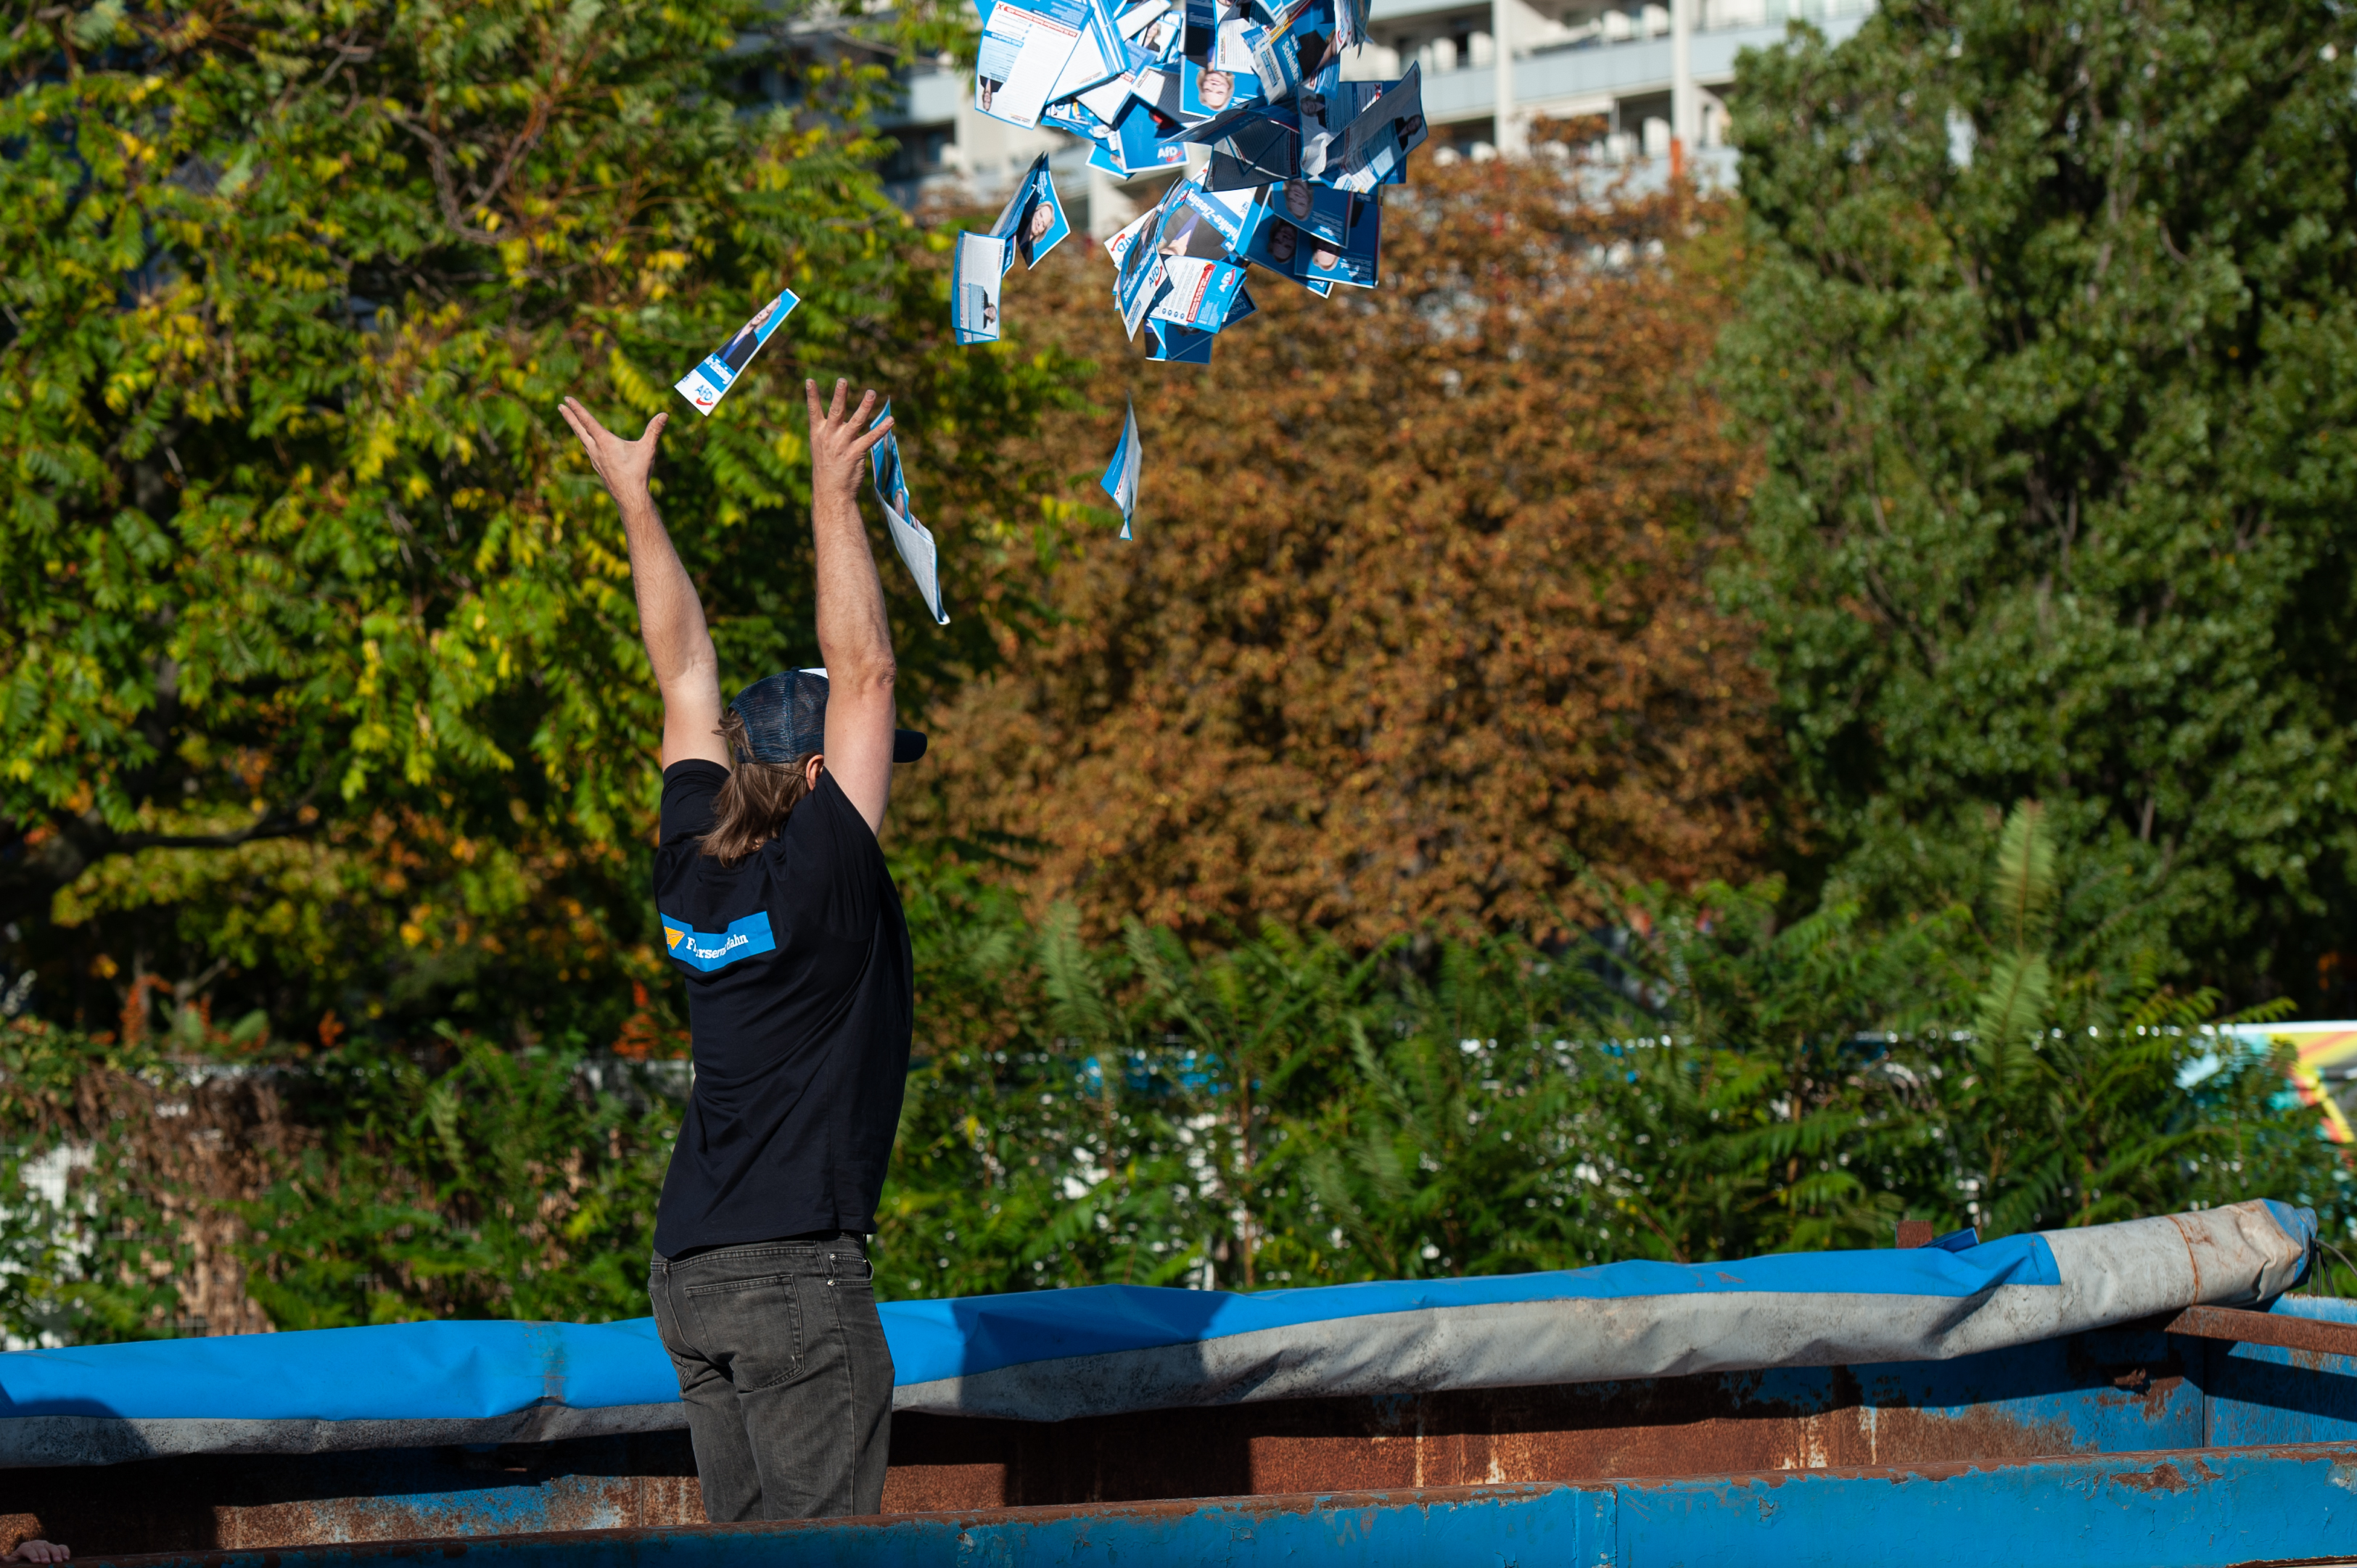 The person is now standing inside a larger waste container filled up high with flyers. They are throwing a bunch of them into the air. The photo is taken from behind their right side in a wide perspective, they are visible from the knees up to the head. I the background, there are some trees and a multi-story apartment building.